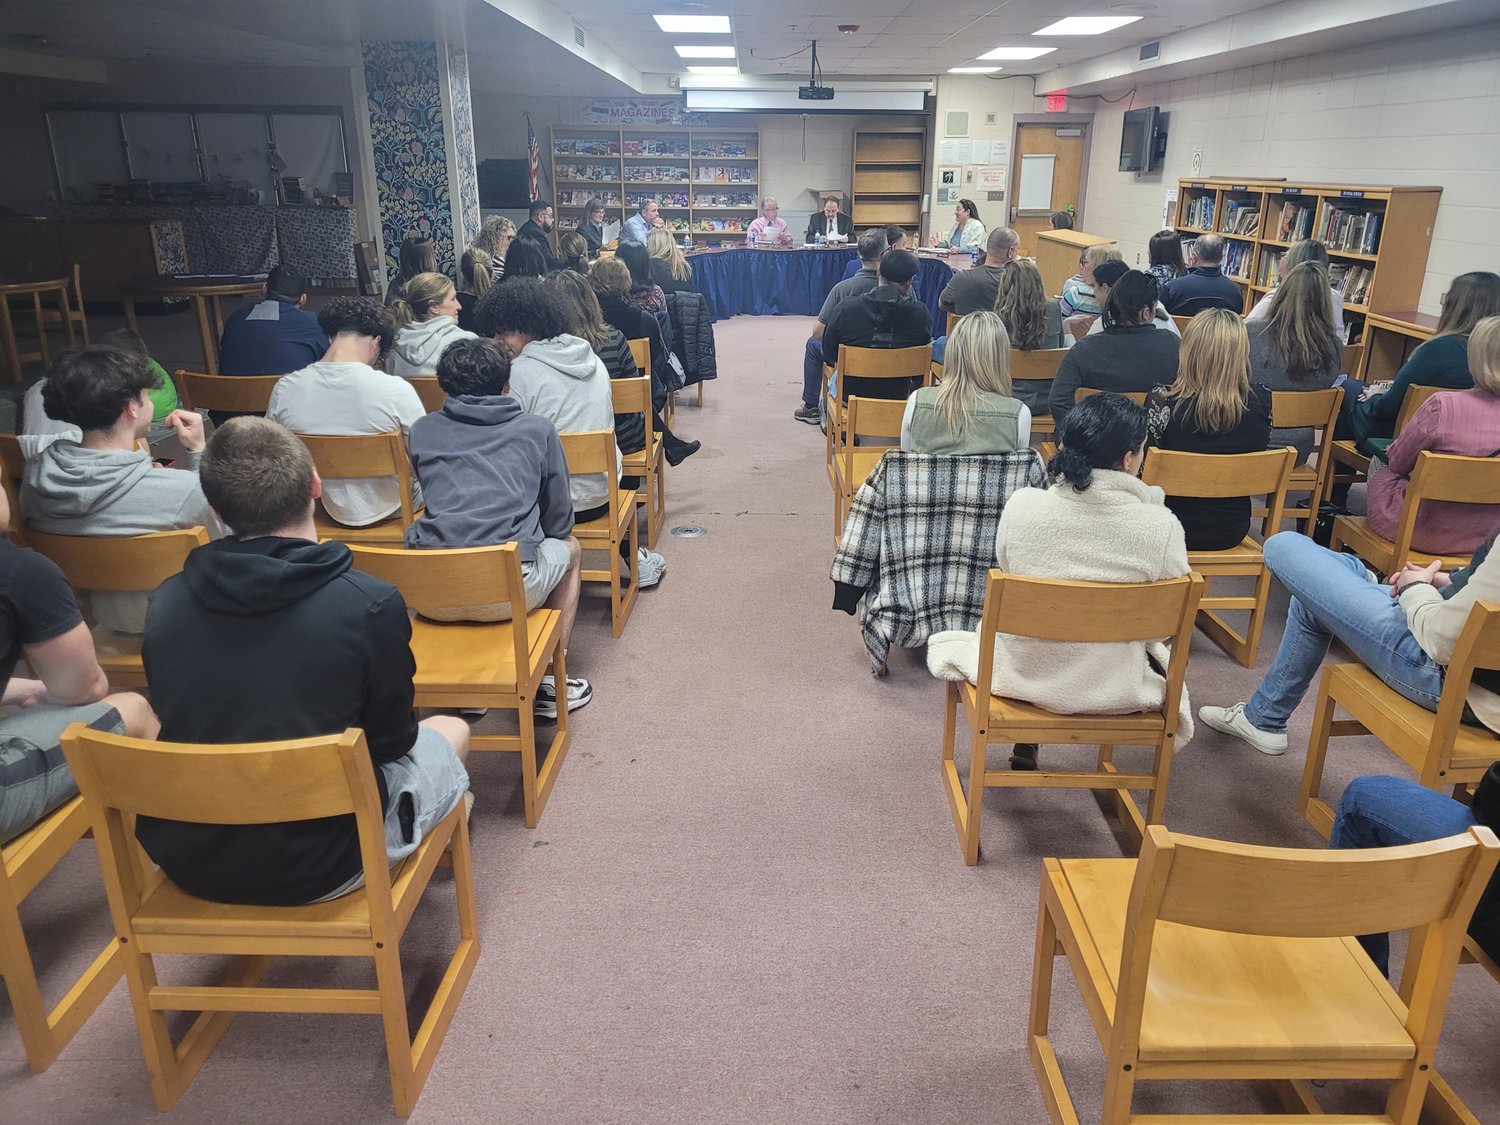 PACKED HOUSE: Matt Velino, the now former assistant principal at Johnston Senior High School has been promoted to the school’s top administrator post — the Principal. The audience was packed with supporters and family.